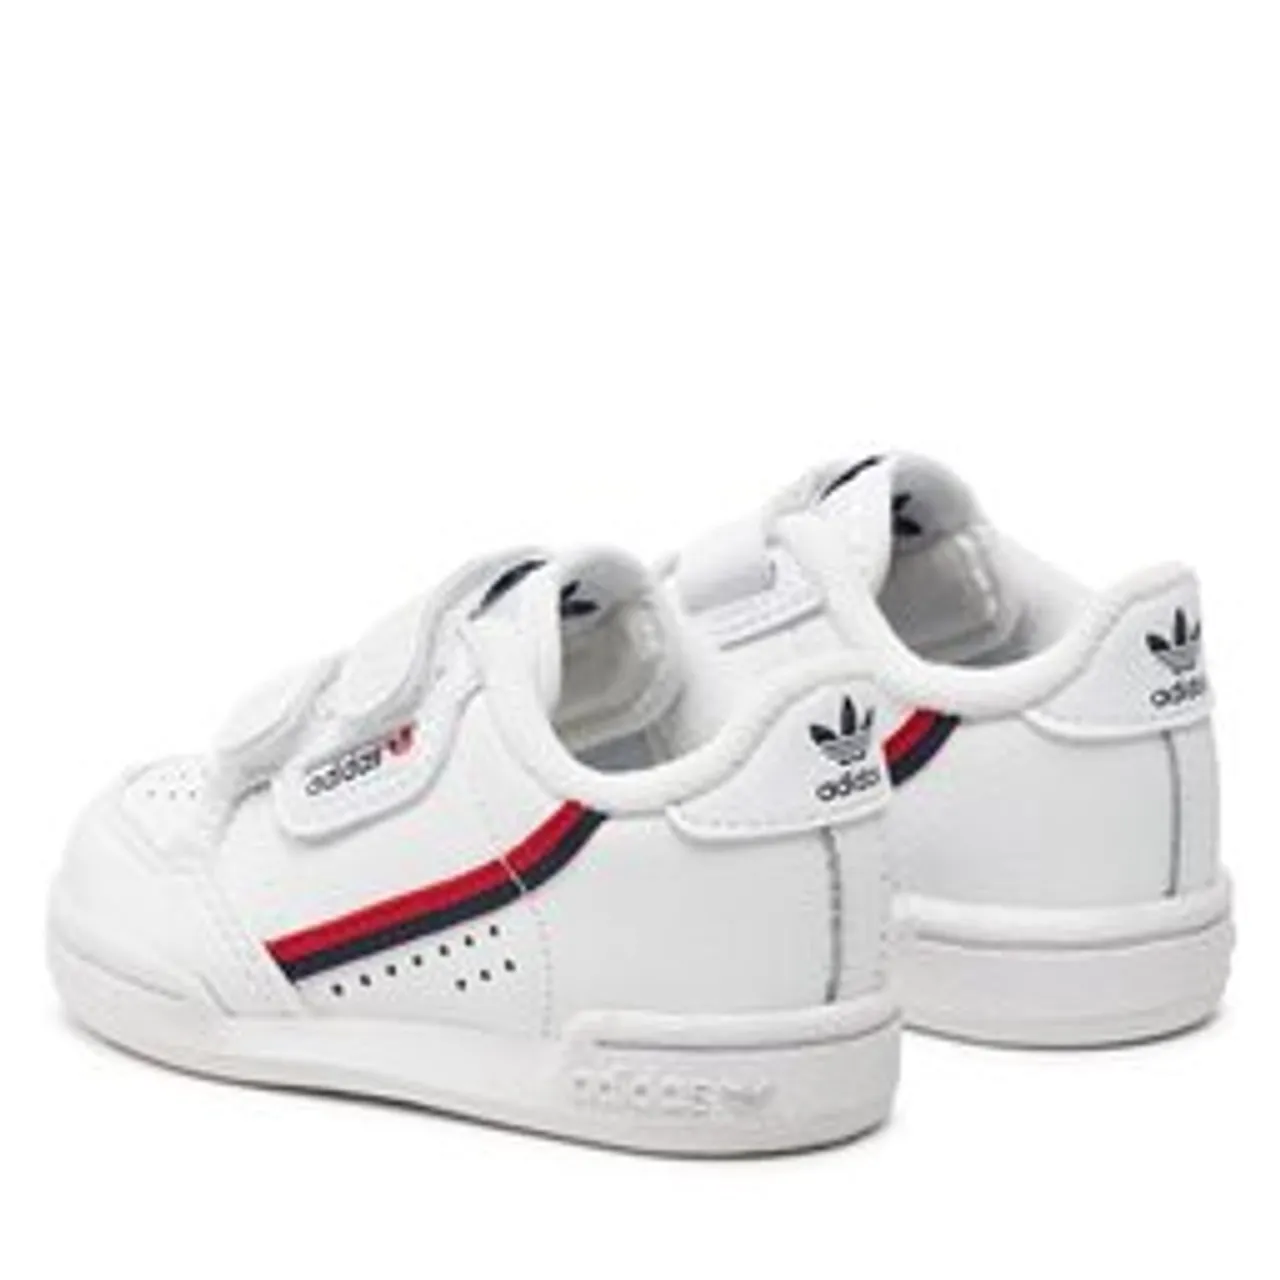 Sneakers adidas Continental 80 Cf I EH3230 Weiß